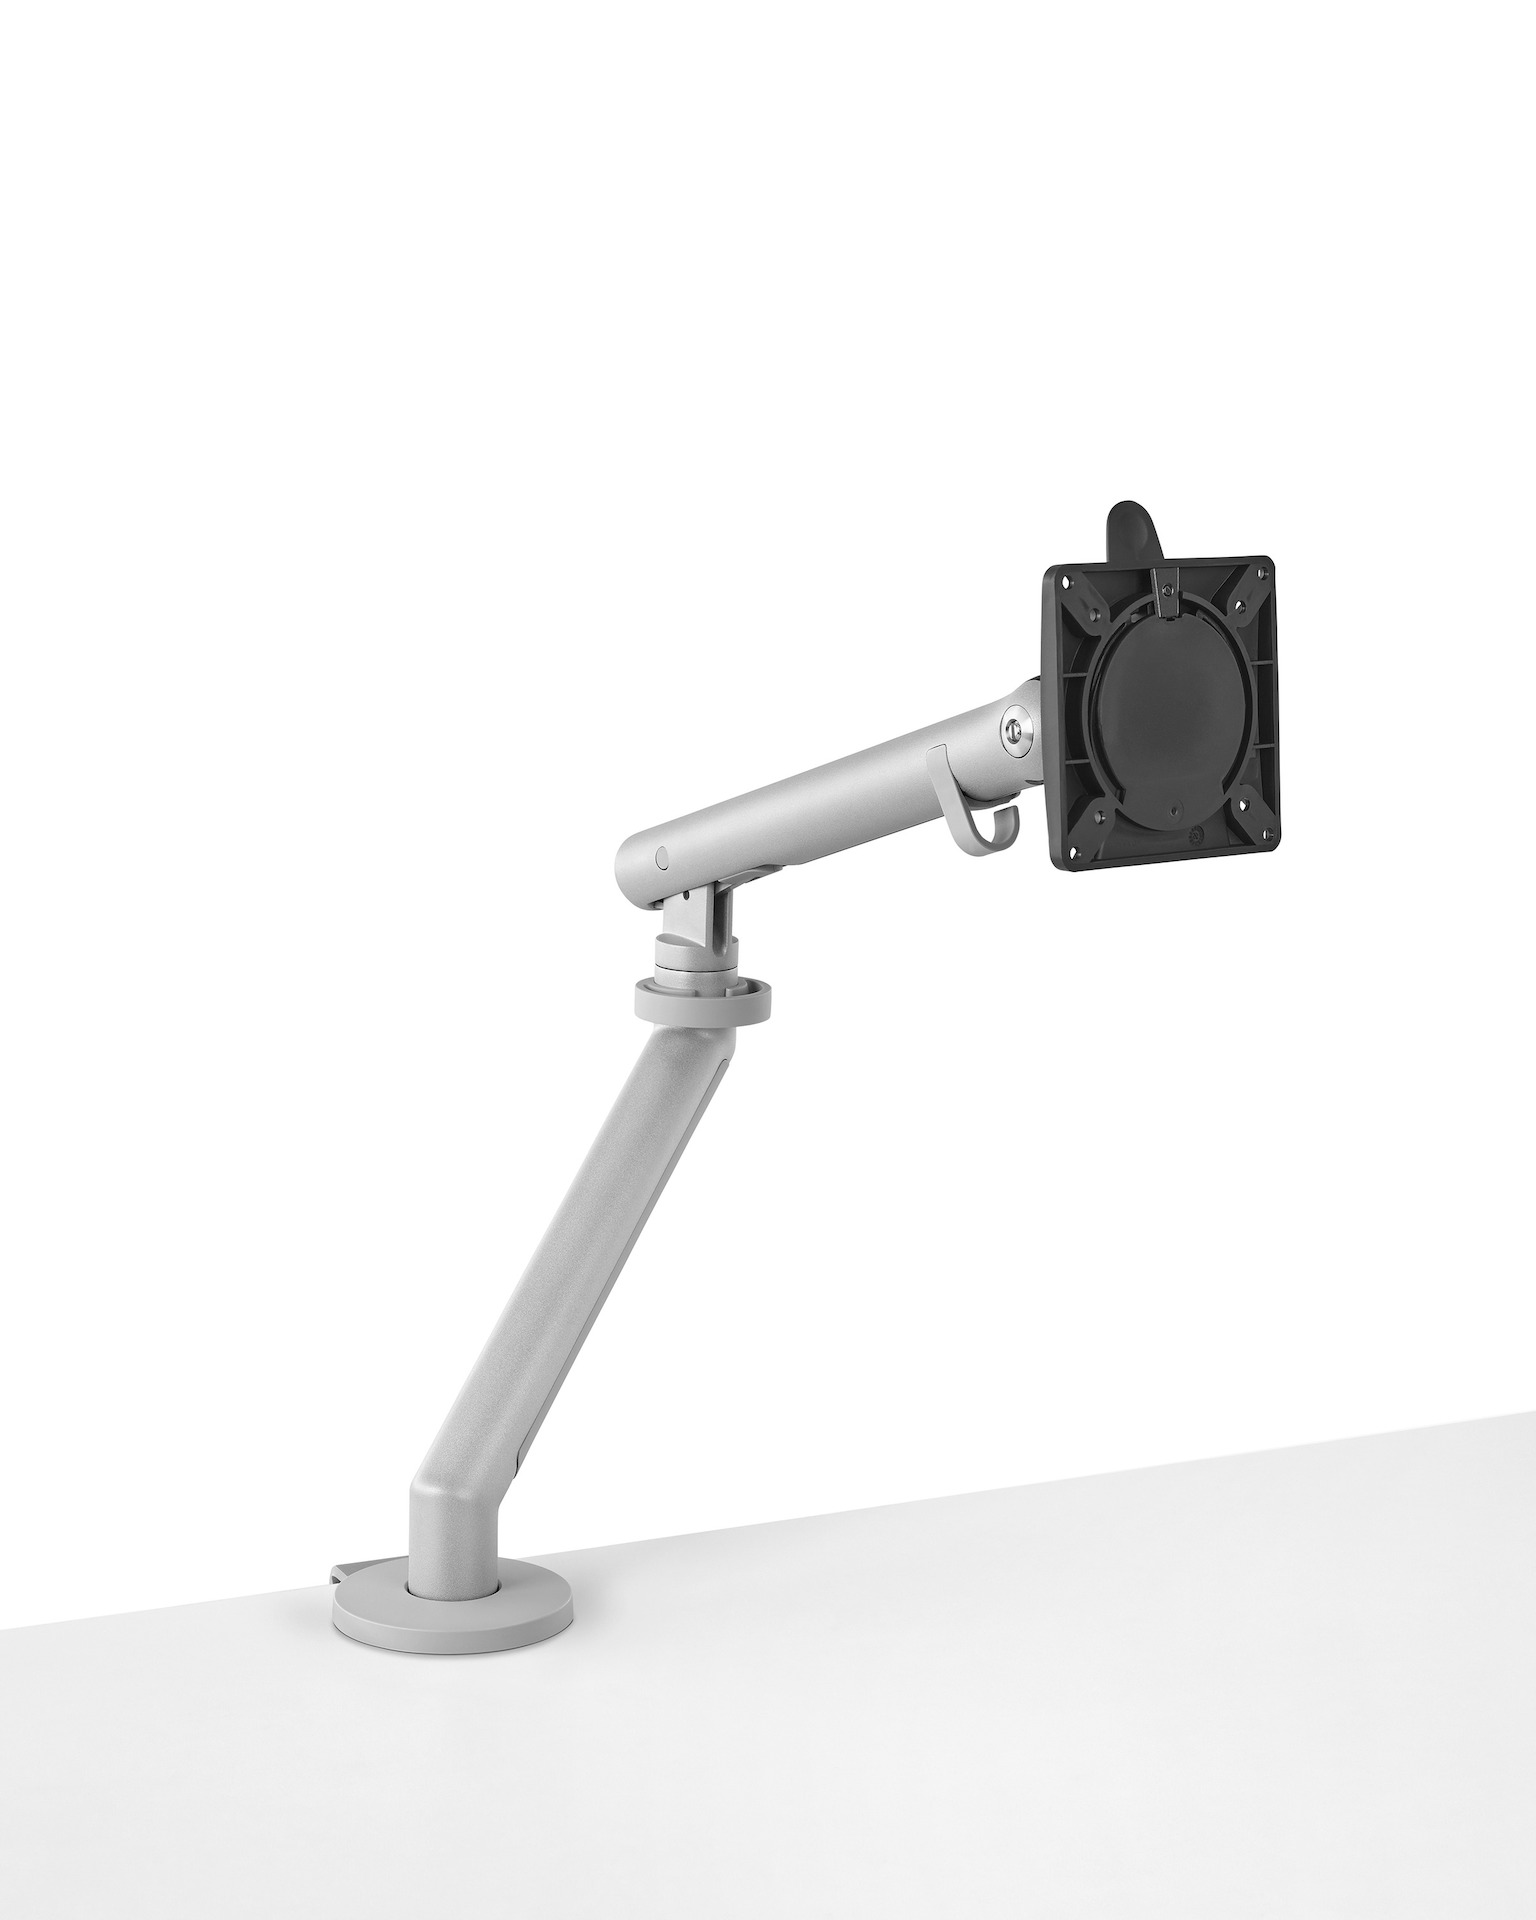 Silver Flo Single-Screen Monitor Arm, viewed from a three quarter angle.